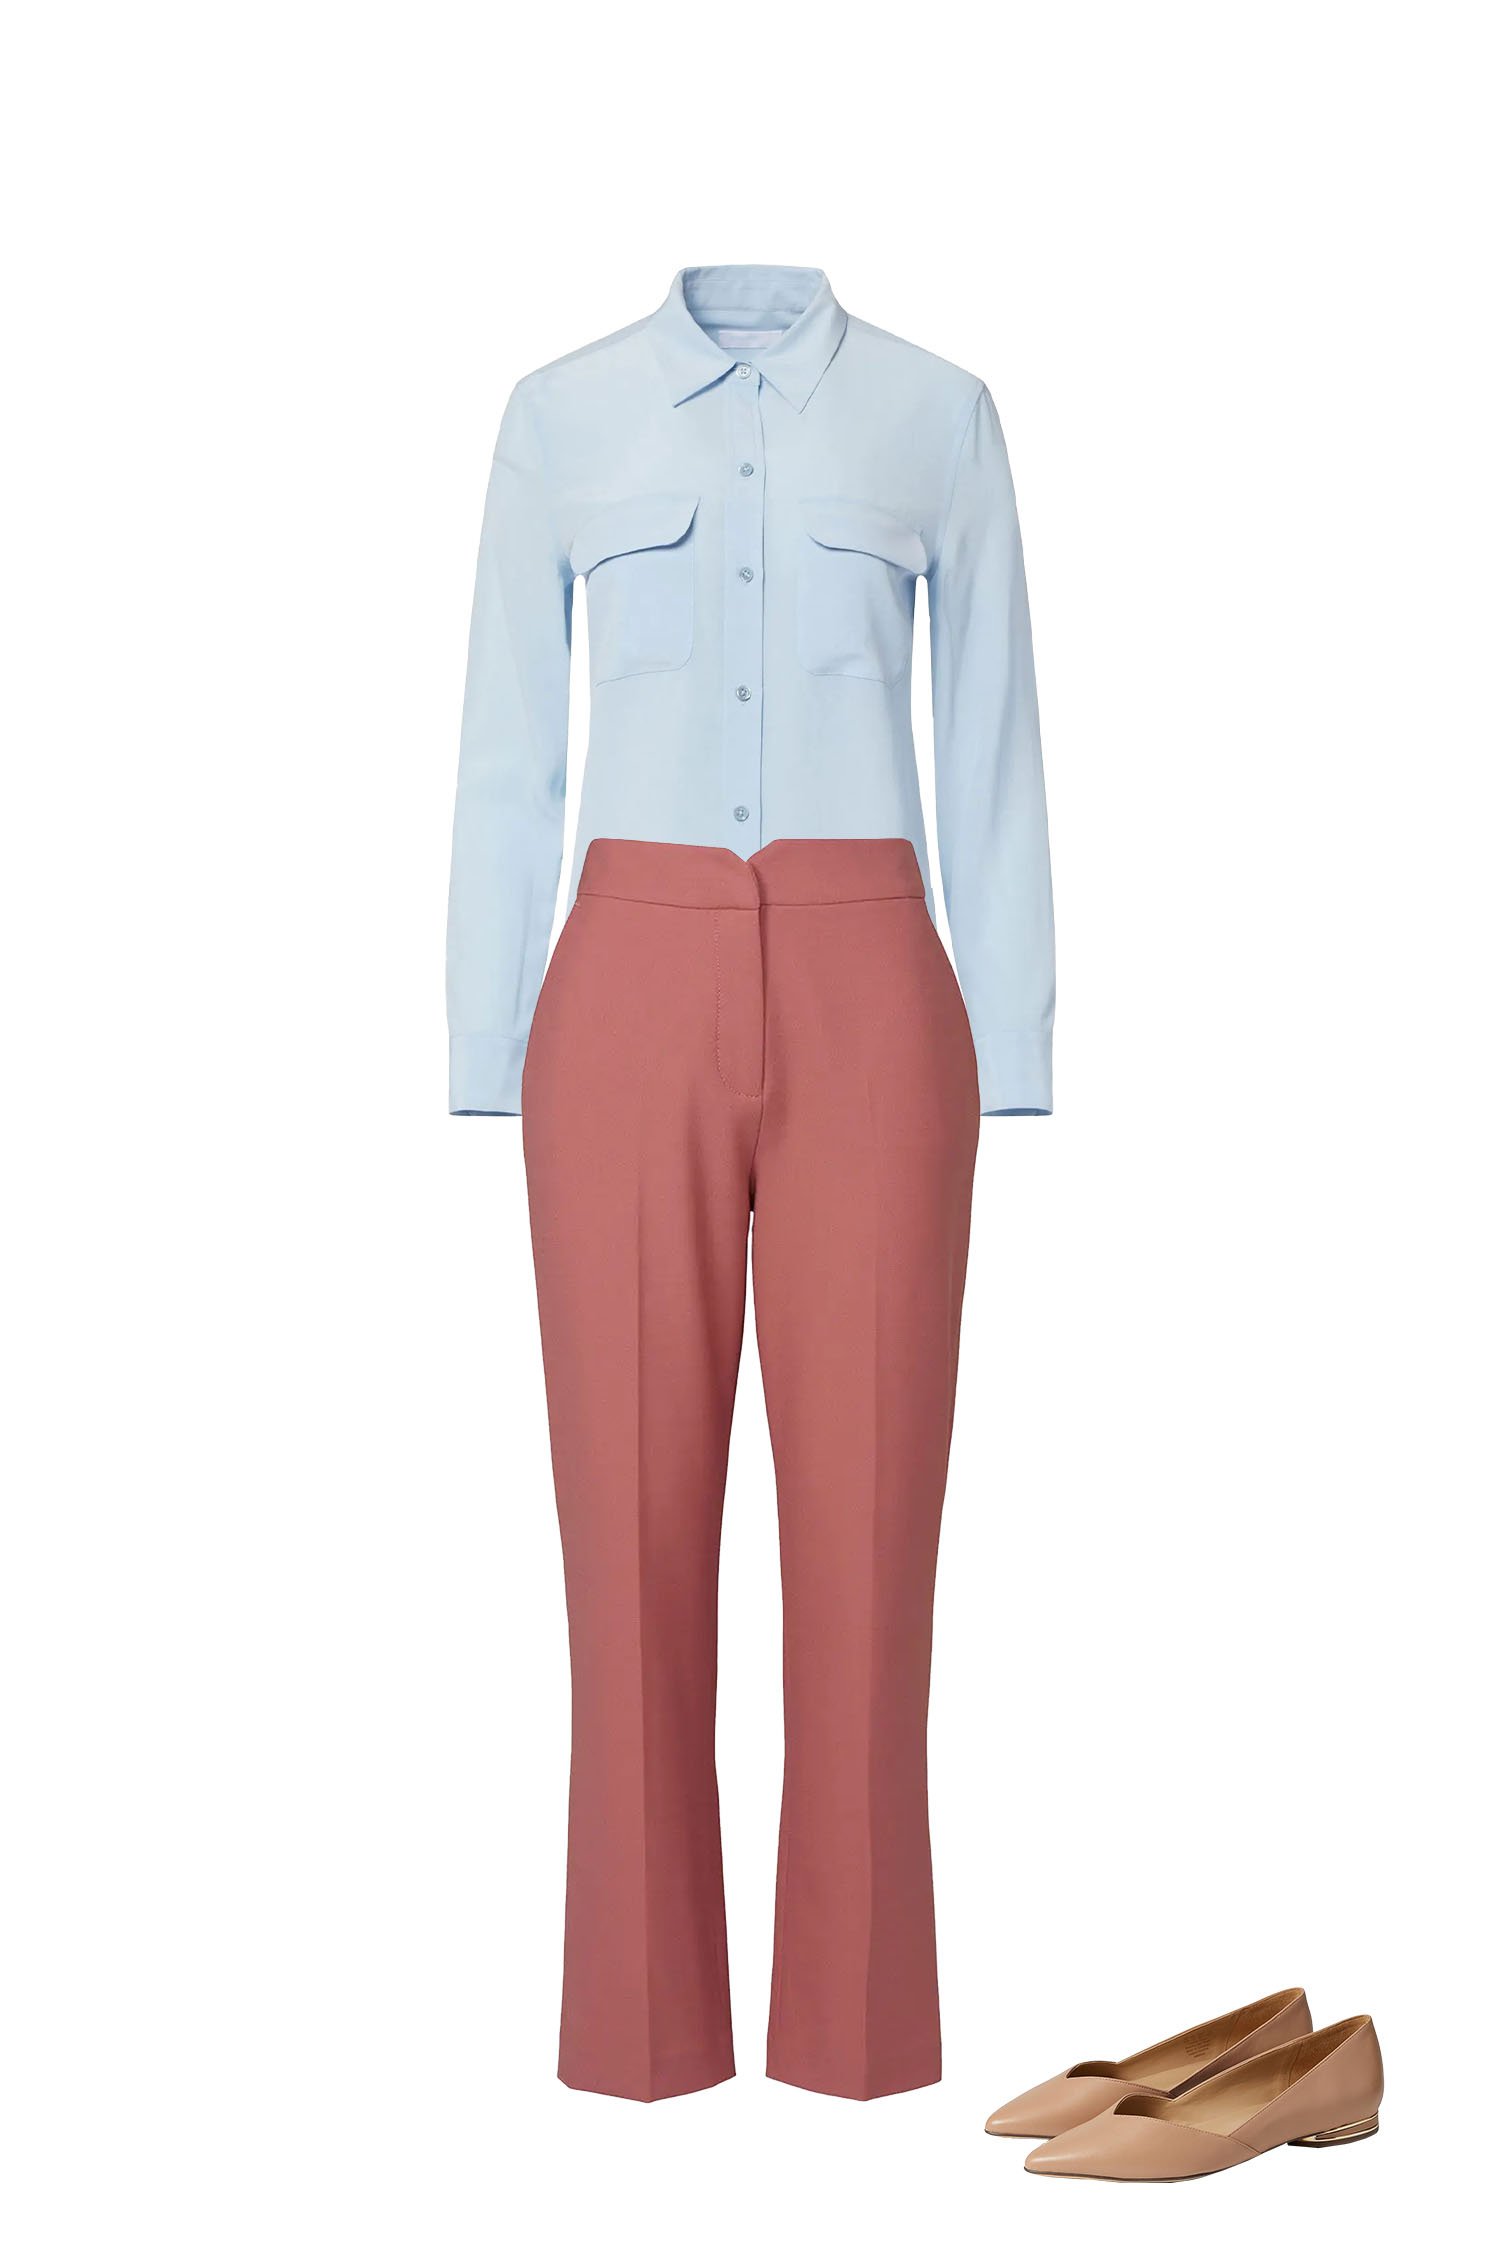 Spring Work Outfit - Rose Pink Ankle Pants, Light Blue Silk Shirt, Nude Pointy Toe Flats